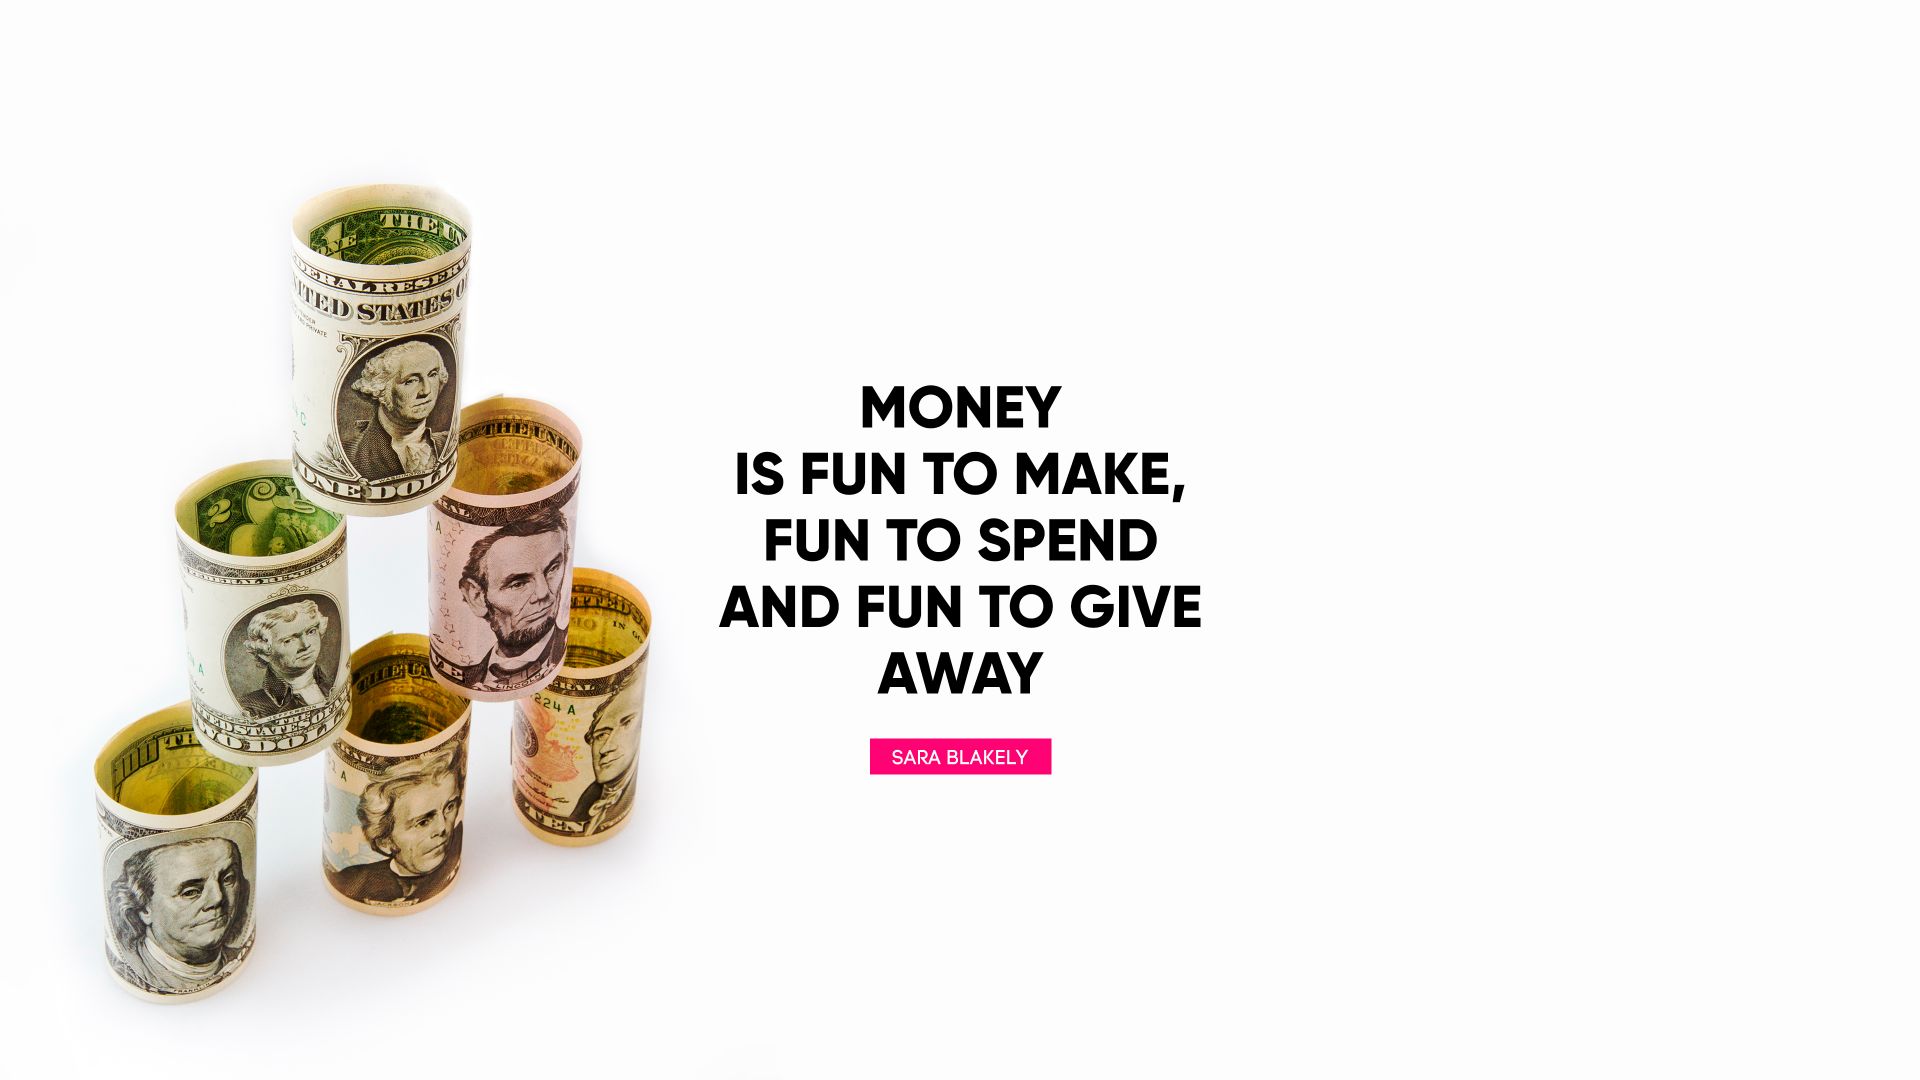 Money is fun to make, fun to spend and fun to give away. - Quote by Sara Blakely